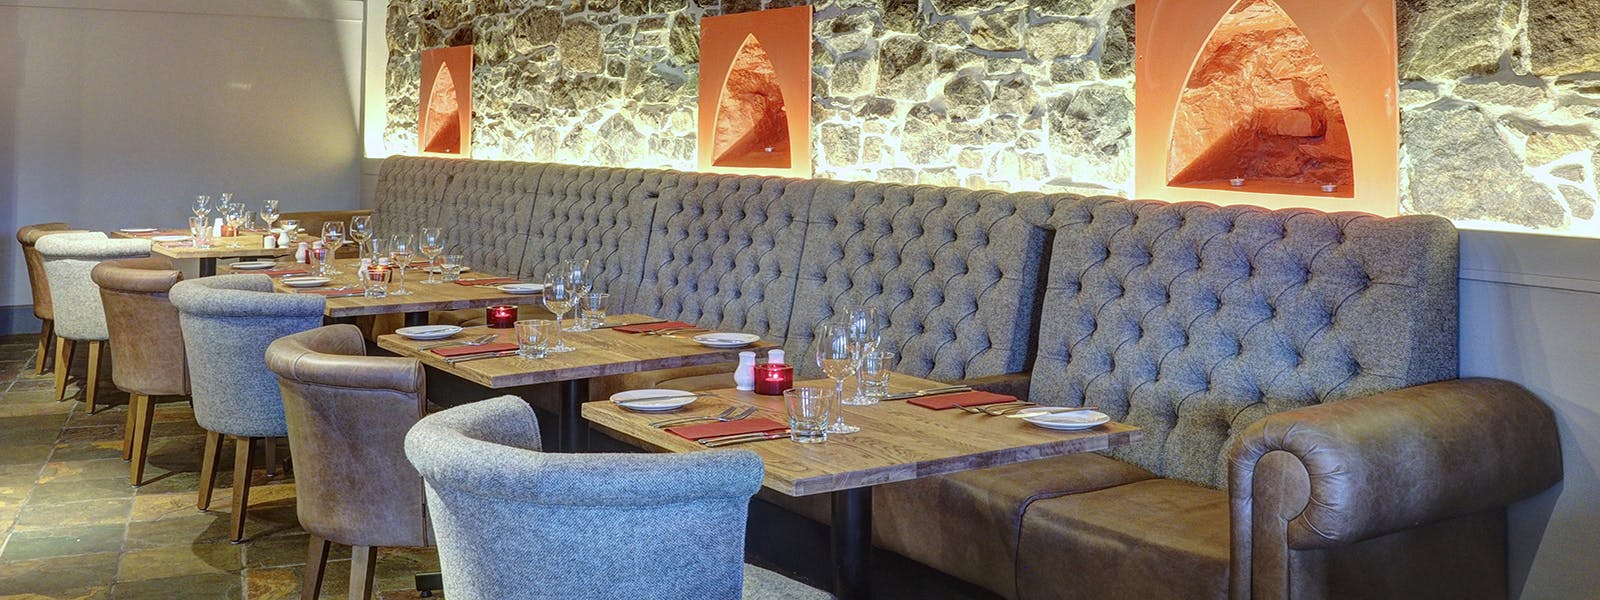 Modern and warm seating arrangements inside the Boatshed restaurant, Royal Hotel, Stornoway, Isle of Lewis